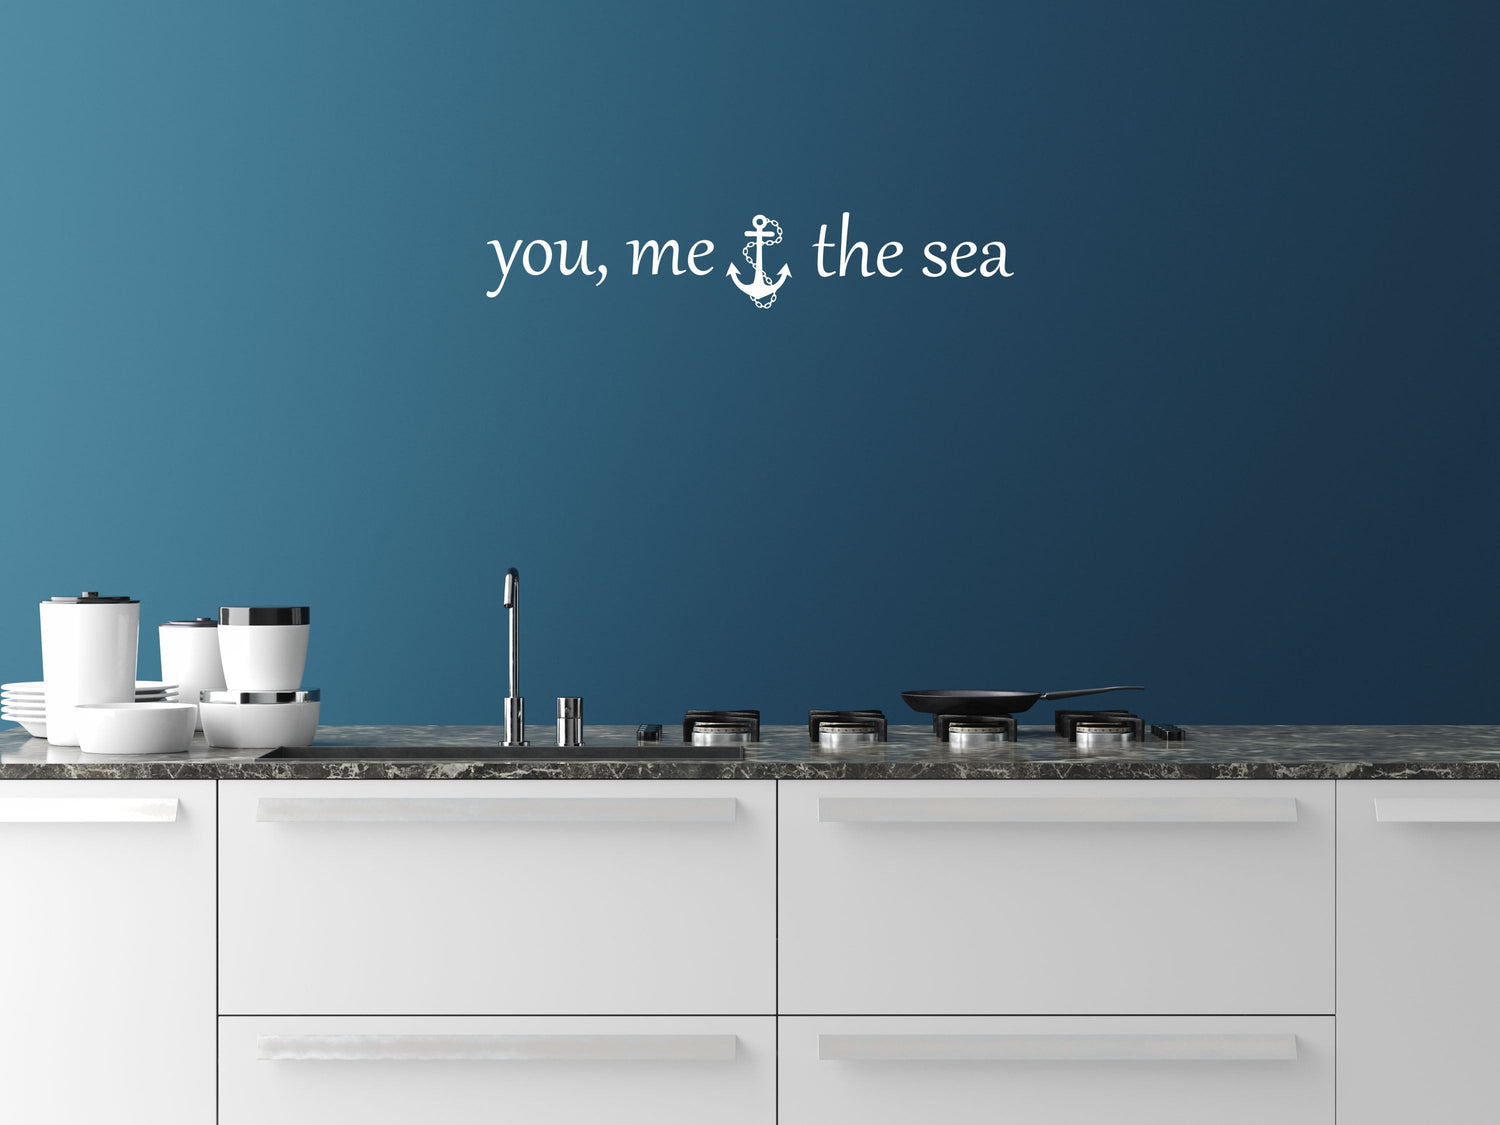 You, Me The Sea Nautical Vinyl Wall Quote - Bedroom Wall Decal - Anchor Wall Words Home Decor Decals Inspirational Wall Signs 